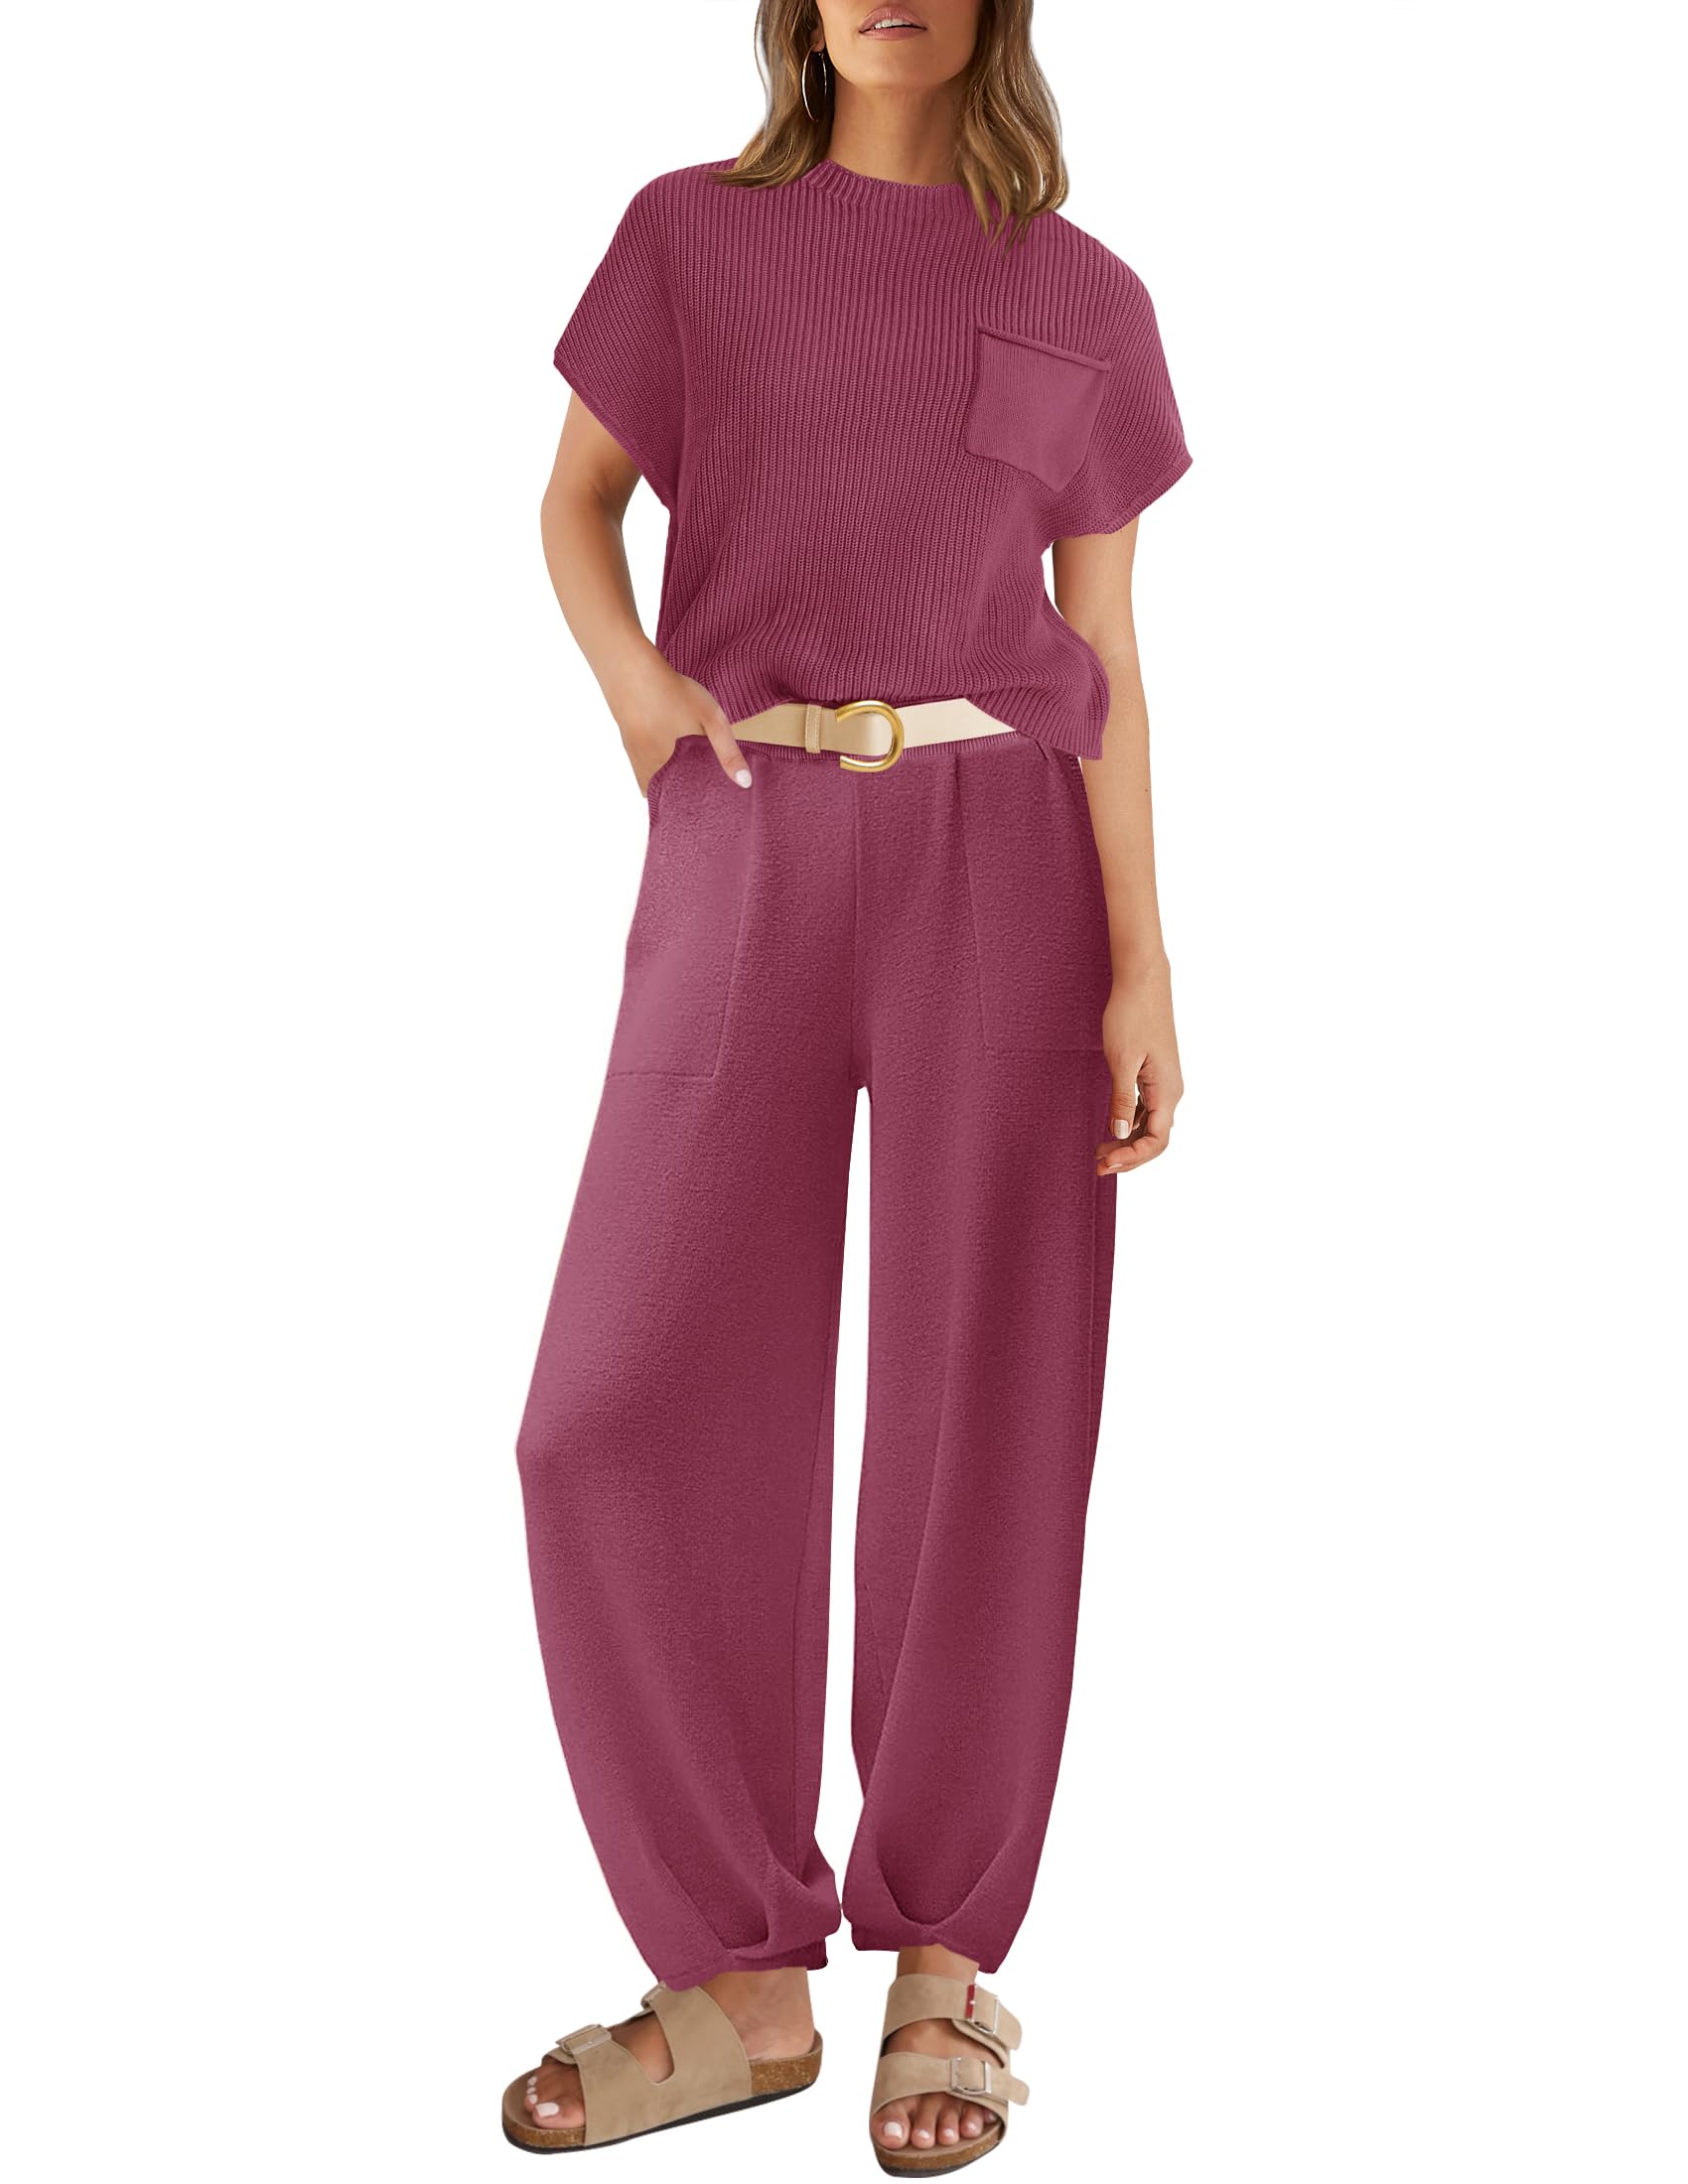 This Zesica Two-piece Loungewear Set Is Popular on